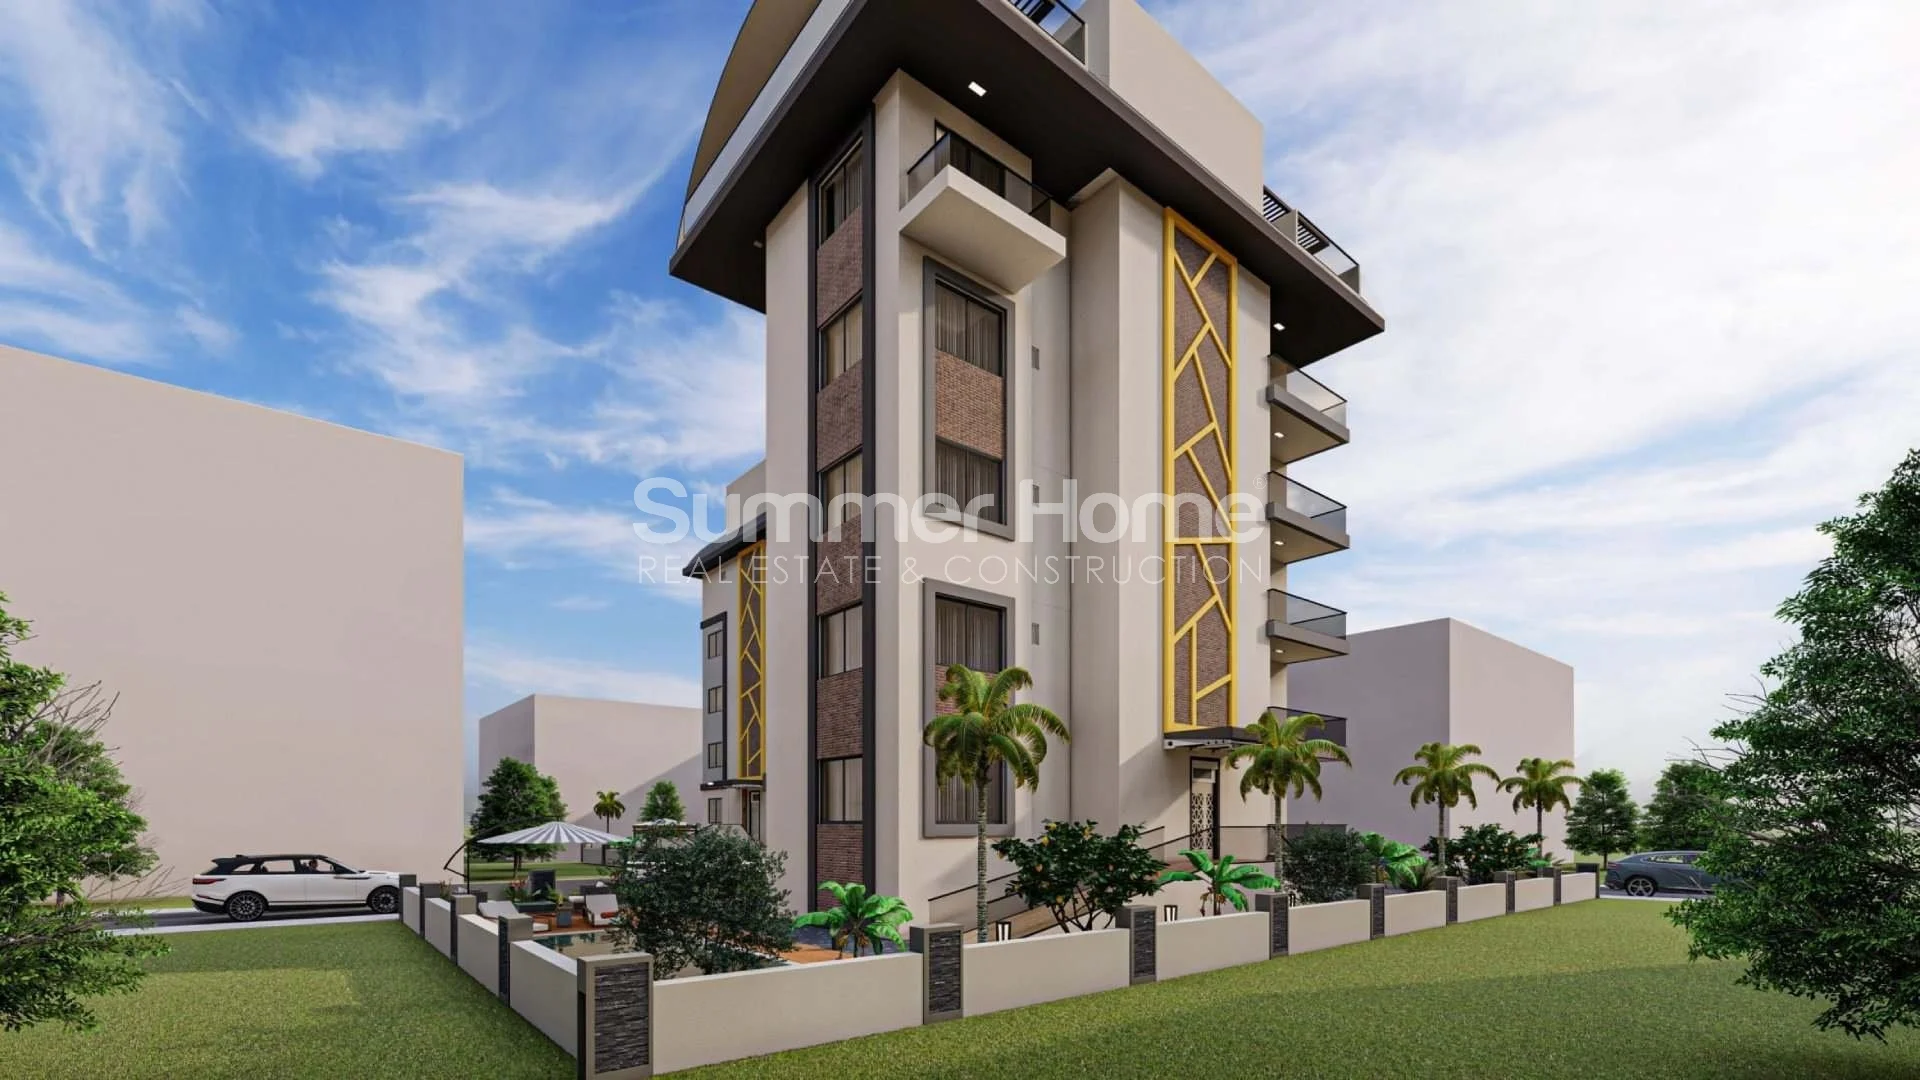 Contemporary Chic Apartments For Sale in Avsallar general - 2